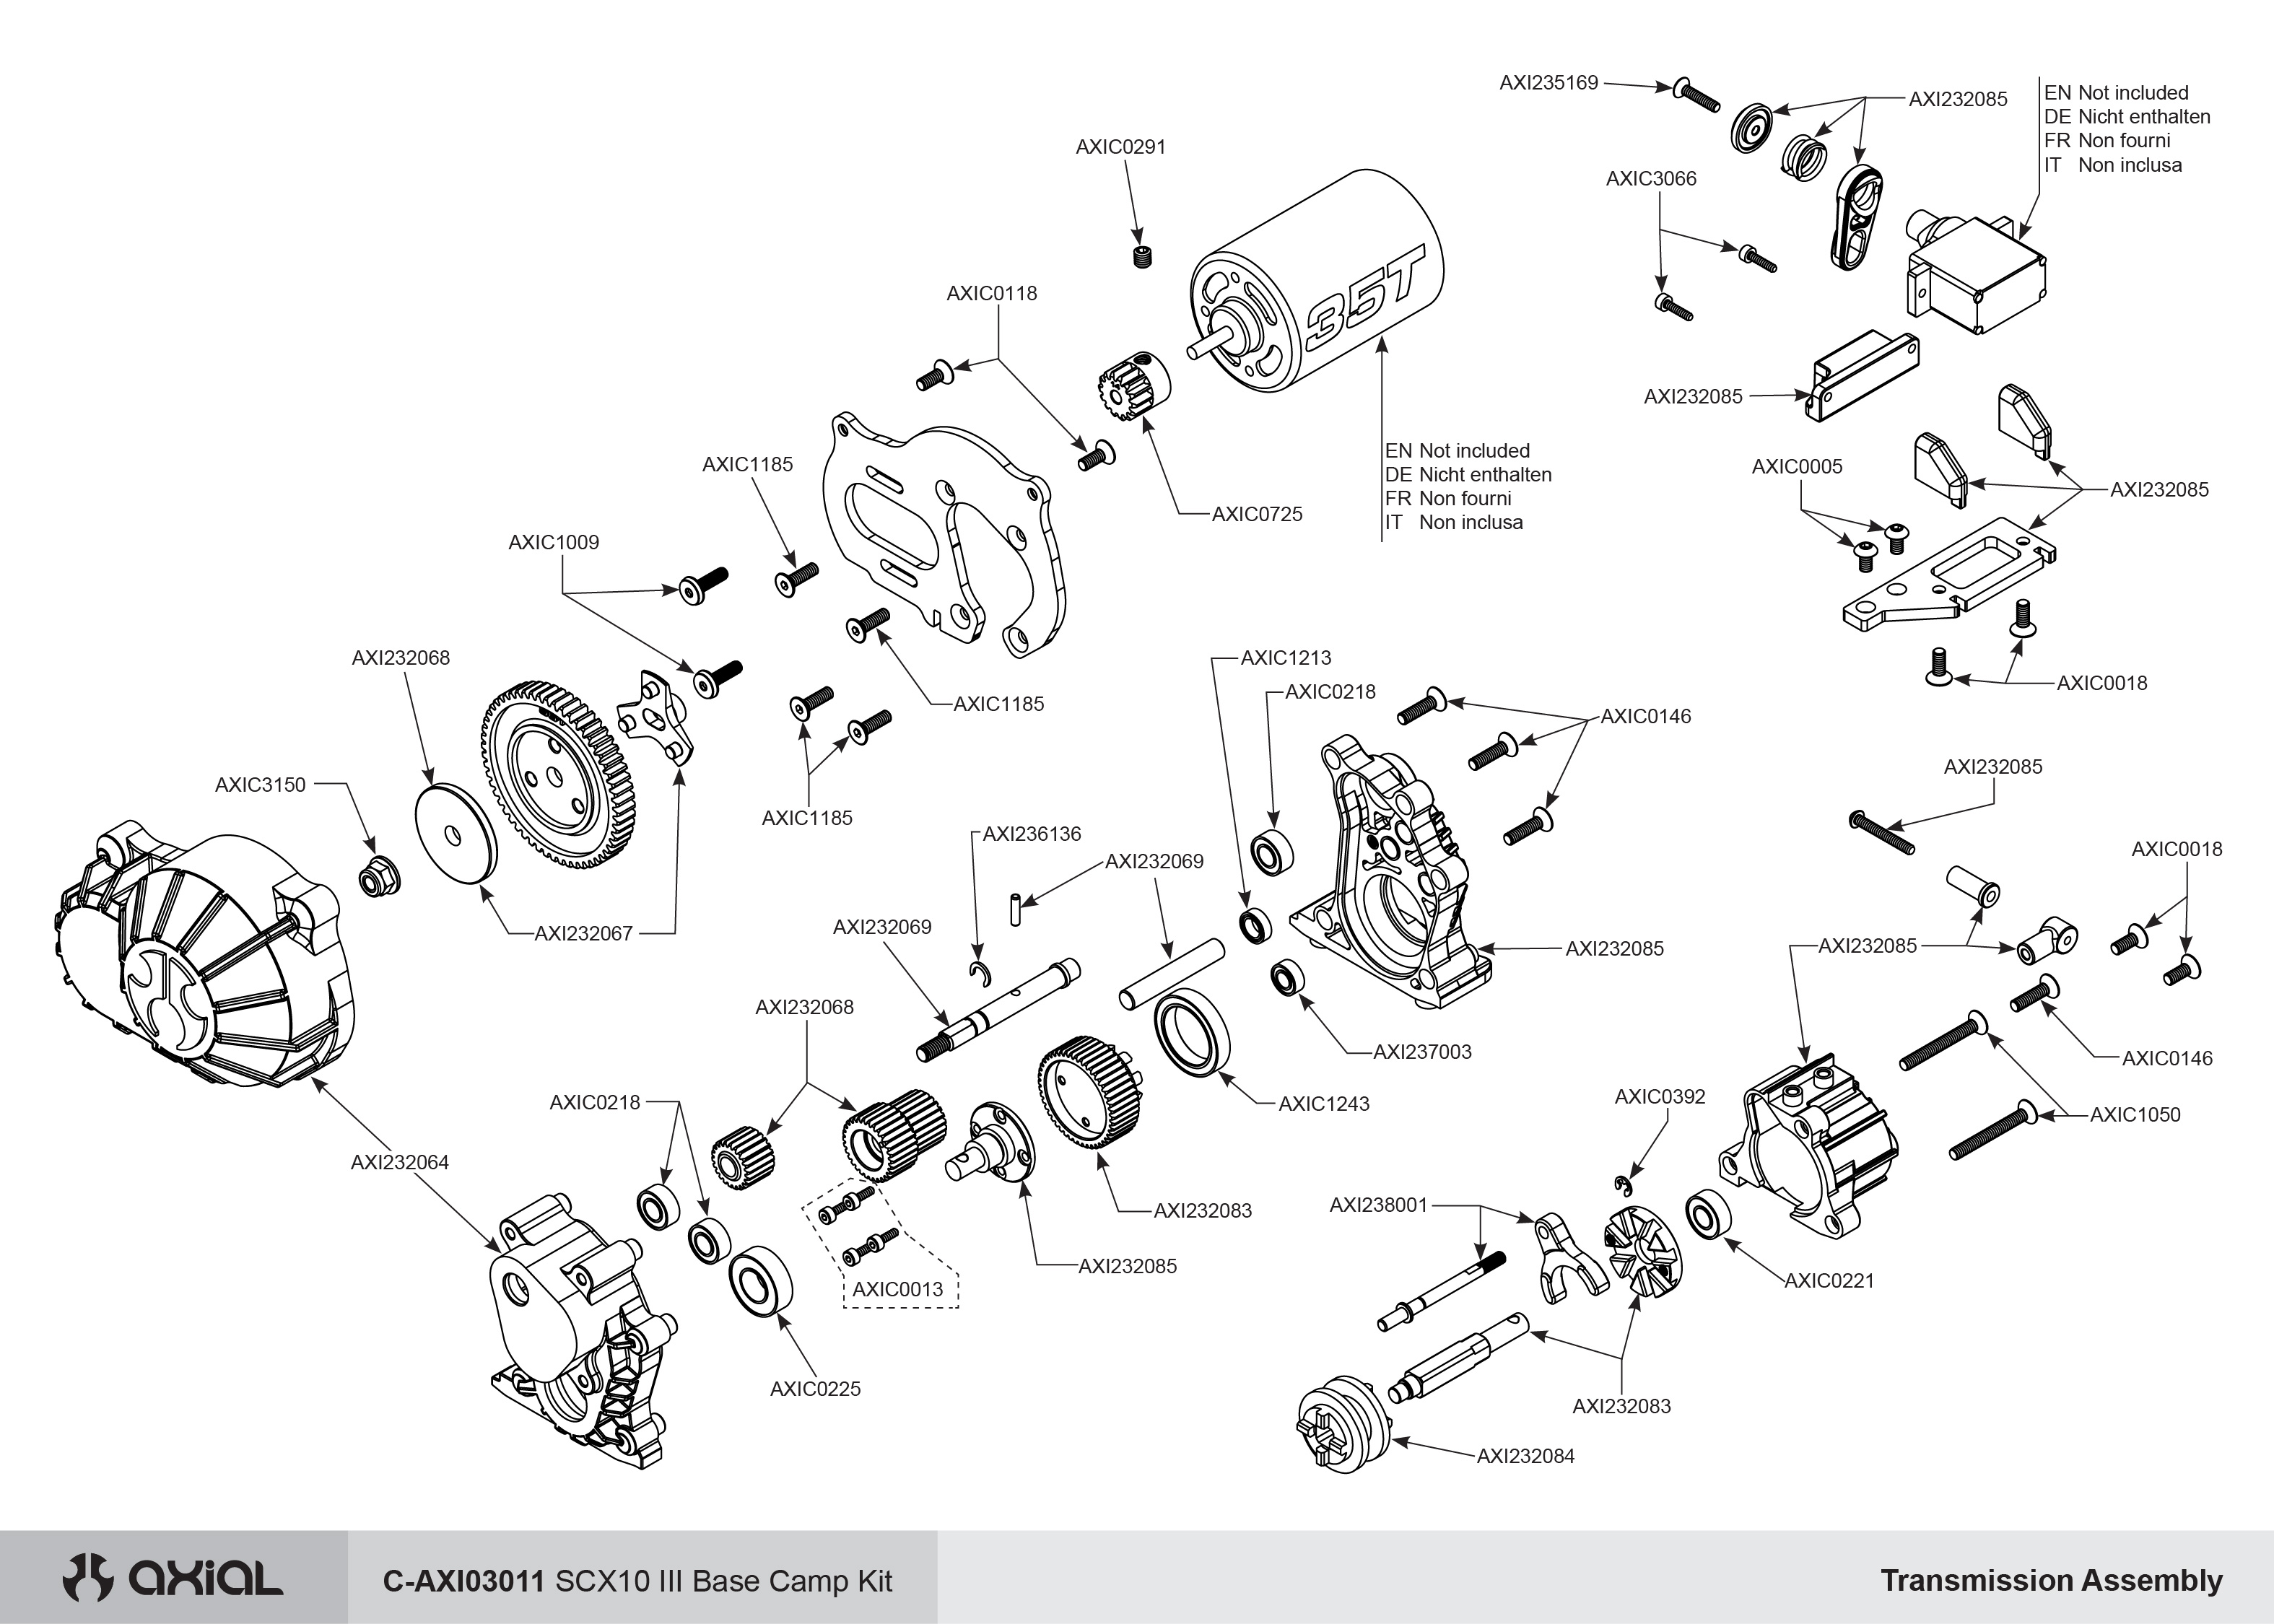 Exploded view